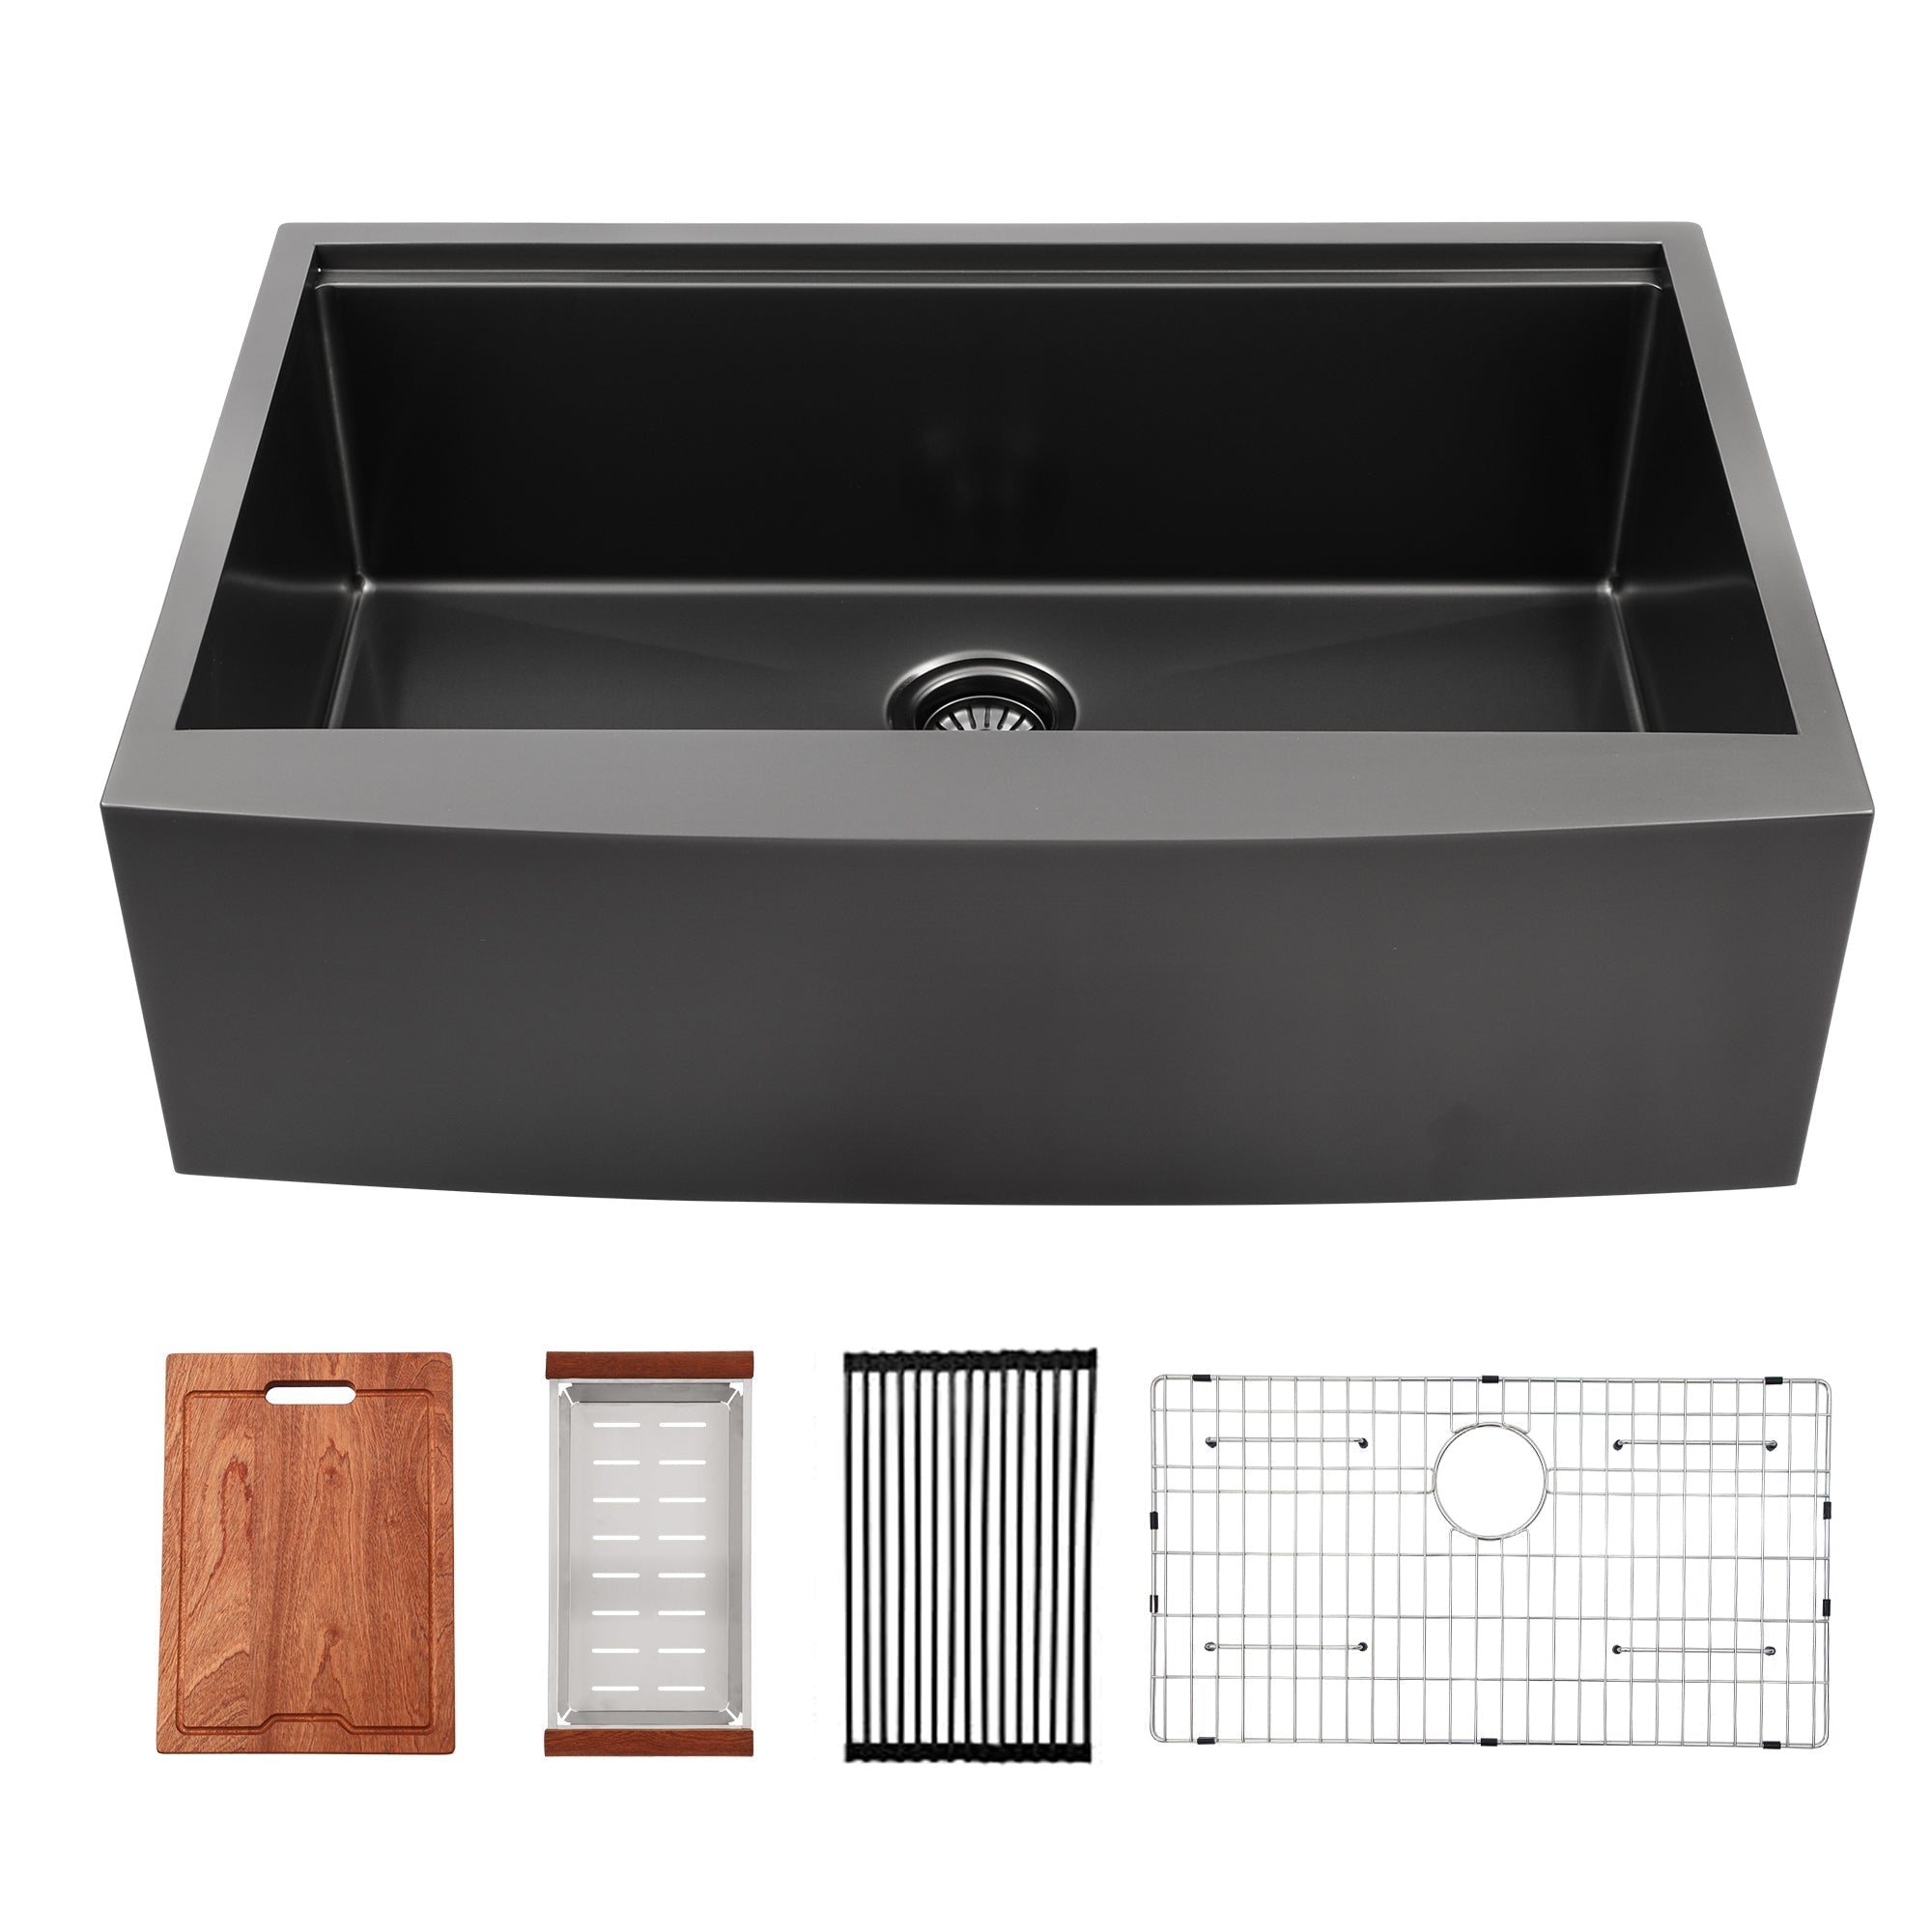 33" W x 22" D Farmhouse Kitchen Sink Workstation Sink with Cutting Board Apron Front | Apron Front / Farmhouse Sinks, Farm Sink, Farmhouse Kitchen Sink, Farmhouse Sink, Gunmetal Black Sinks, Kitchen, Kitchen Sinks, Single Bowl Sinks, Sink, Sink and Drainer, Stainless Steel, Workstation Sinks | Lordear